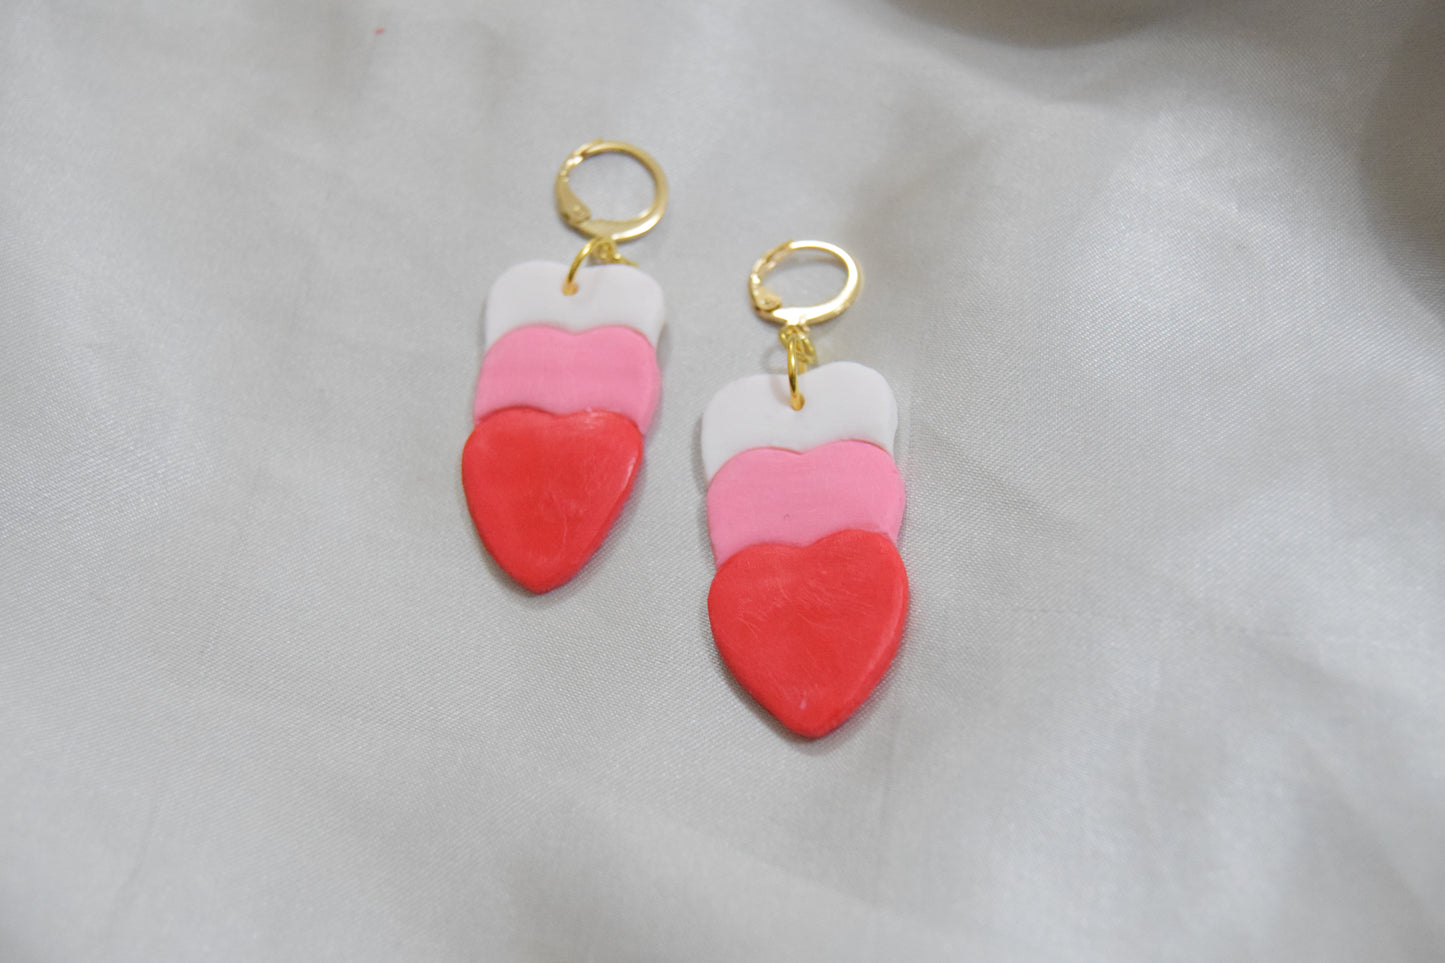 Polymer Clay White, Pink and Red Dangling Heart Earrings